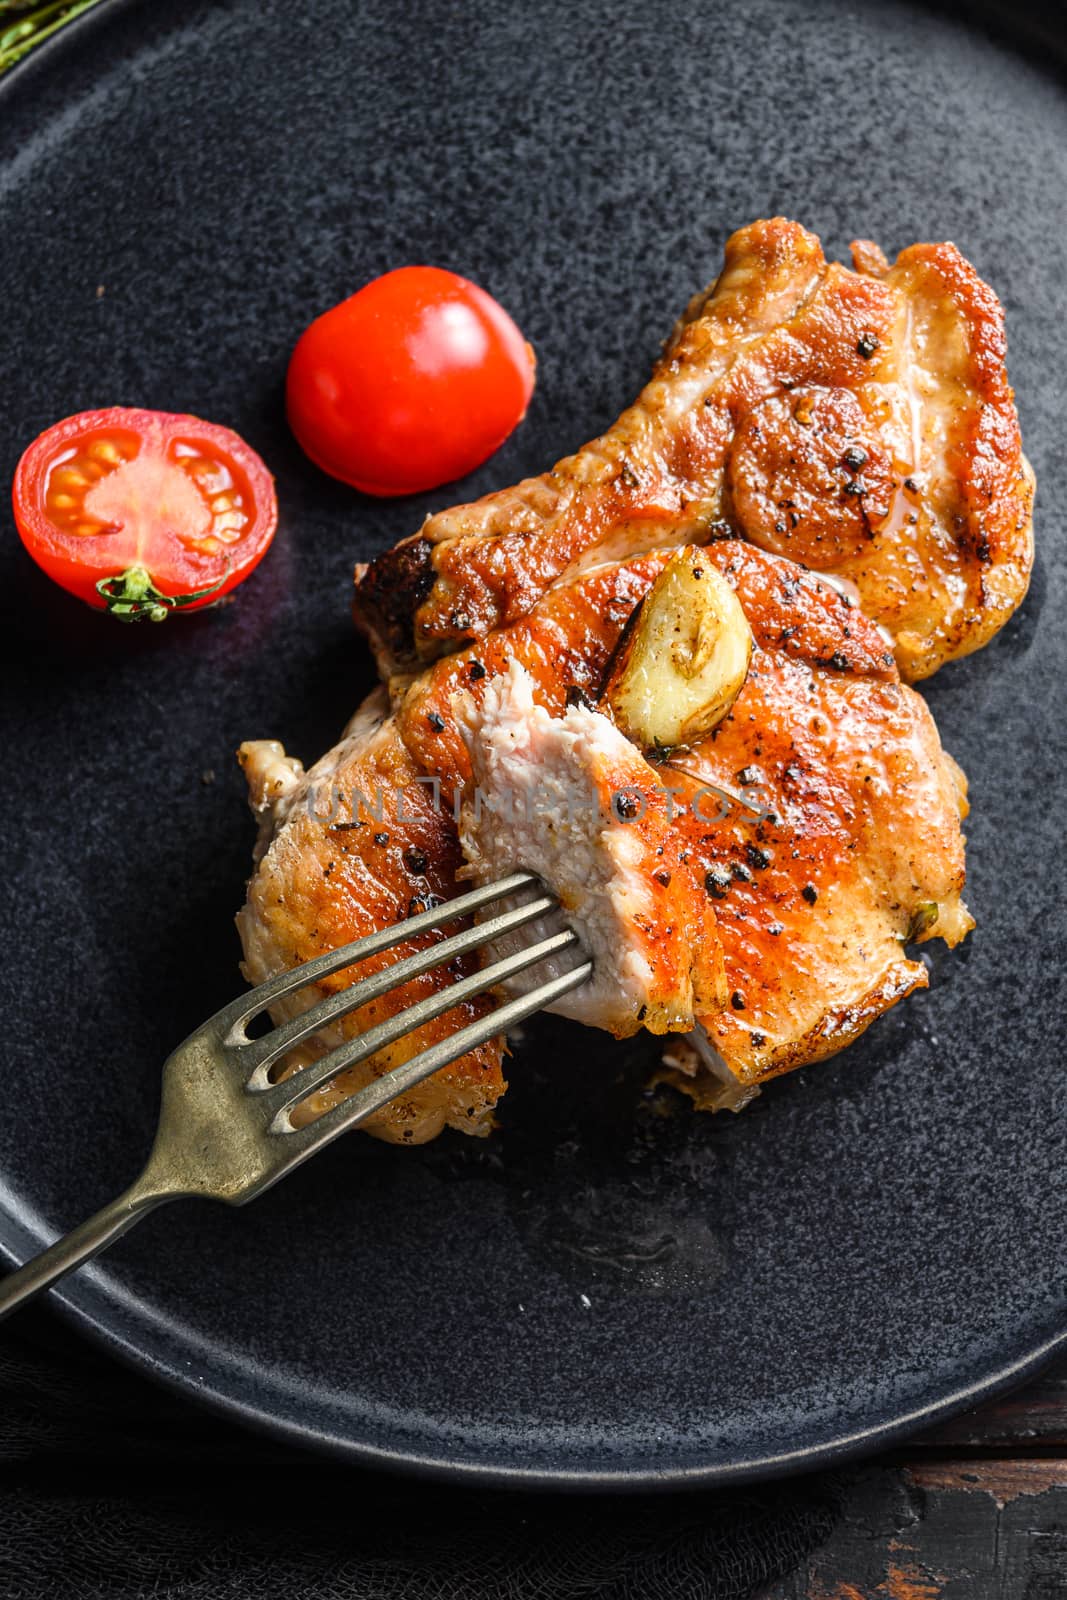 Dish of grilled pork chop with tomatoes top view with knife and slice on fork over old rustic dark wood table table close up top view by Ilianesolenyi